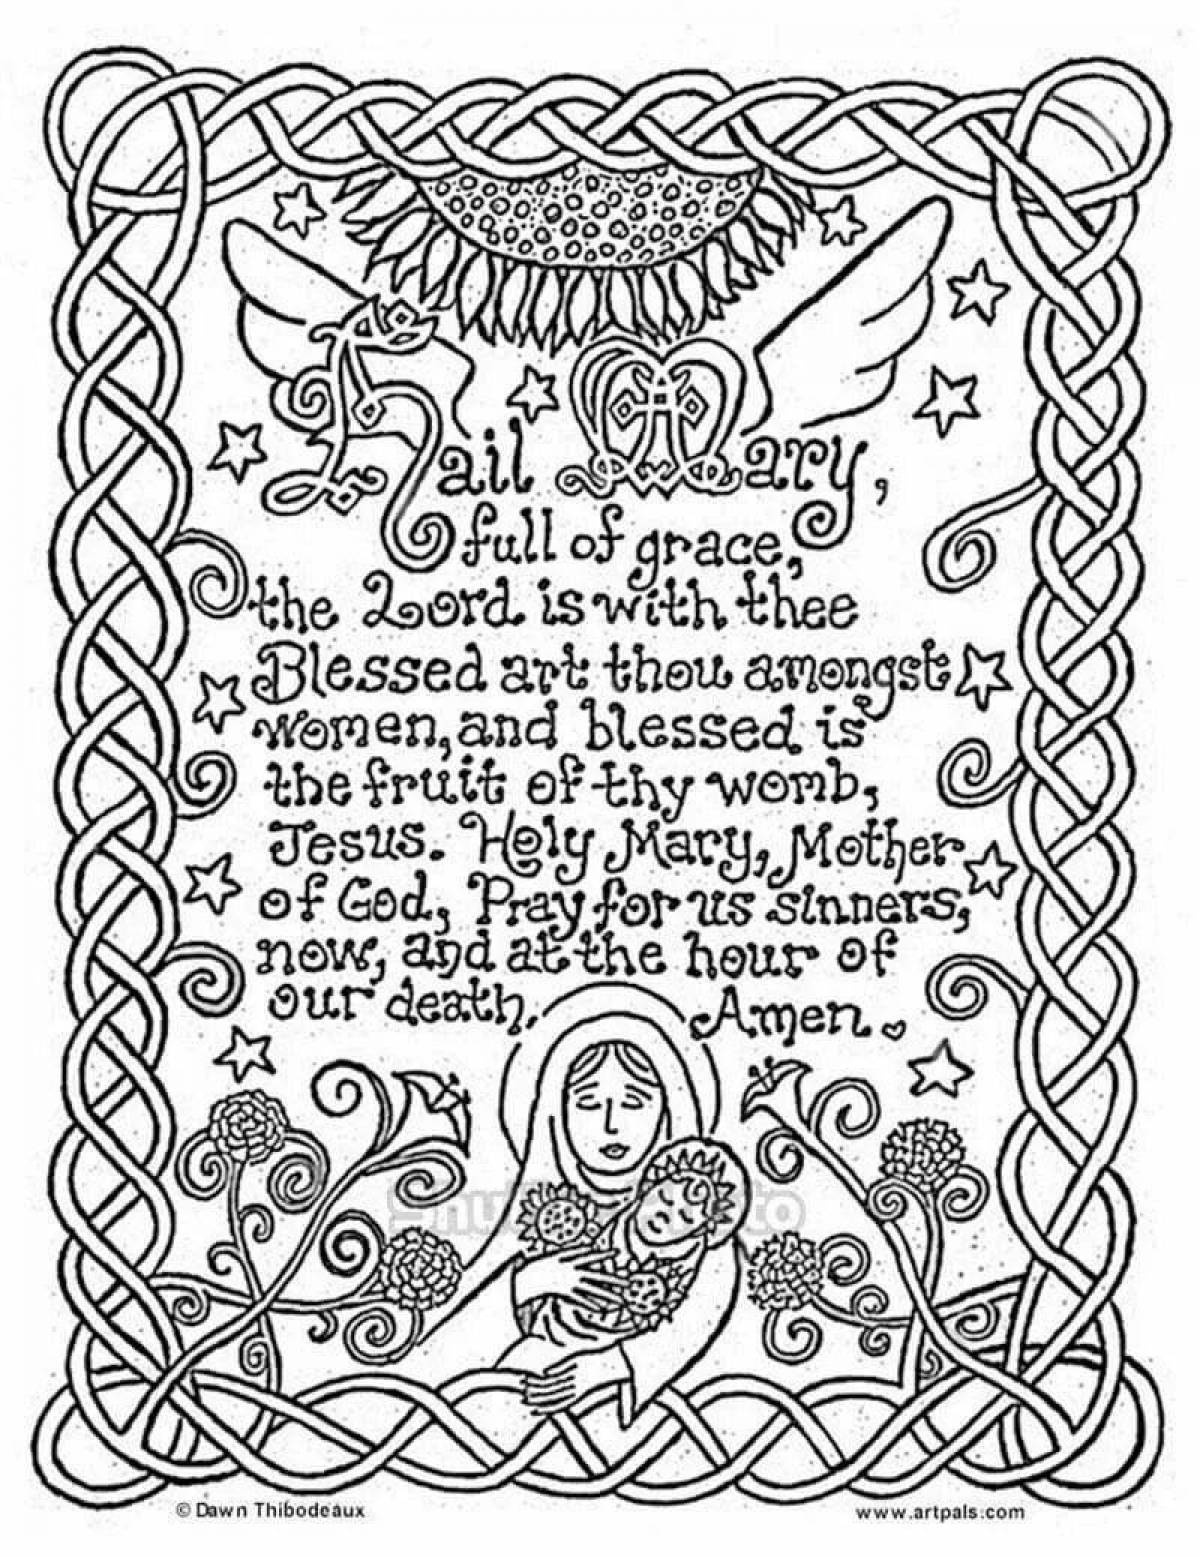 Coloring page cheerful prayer